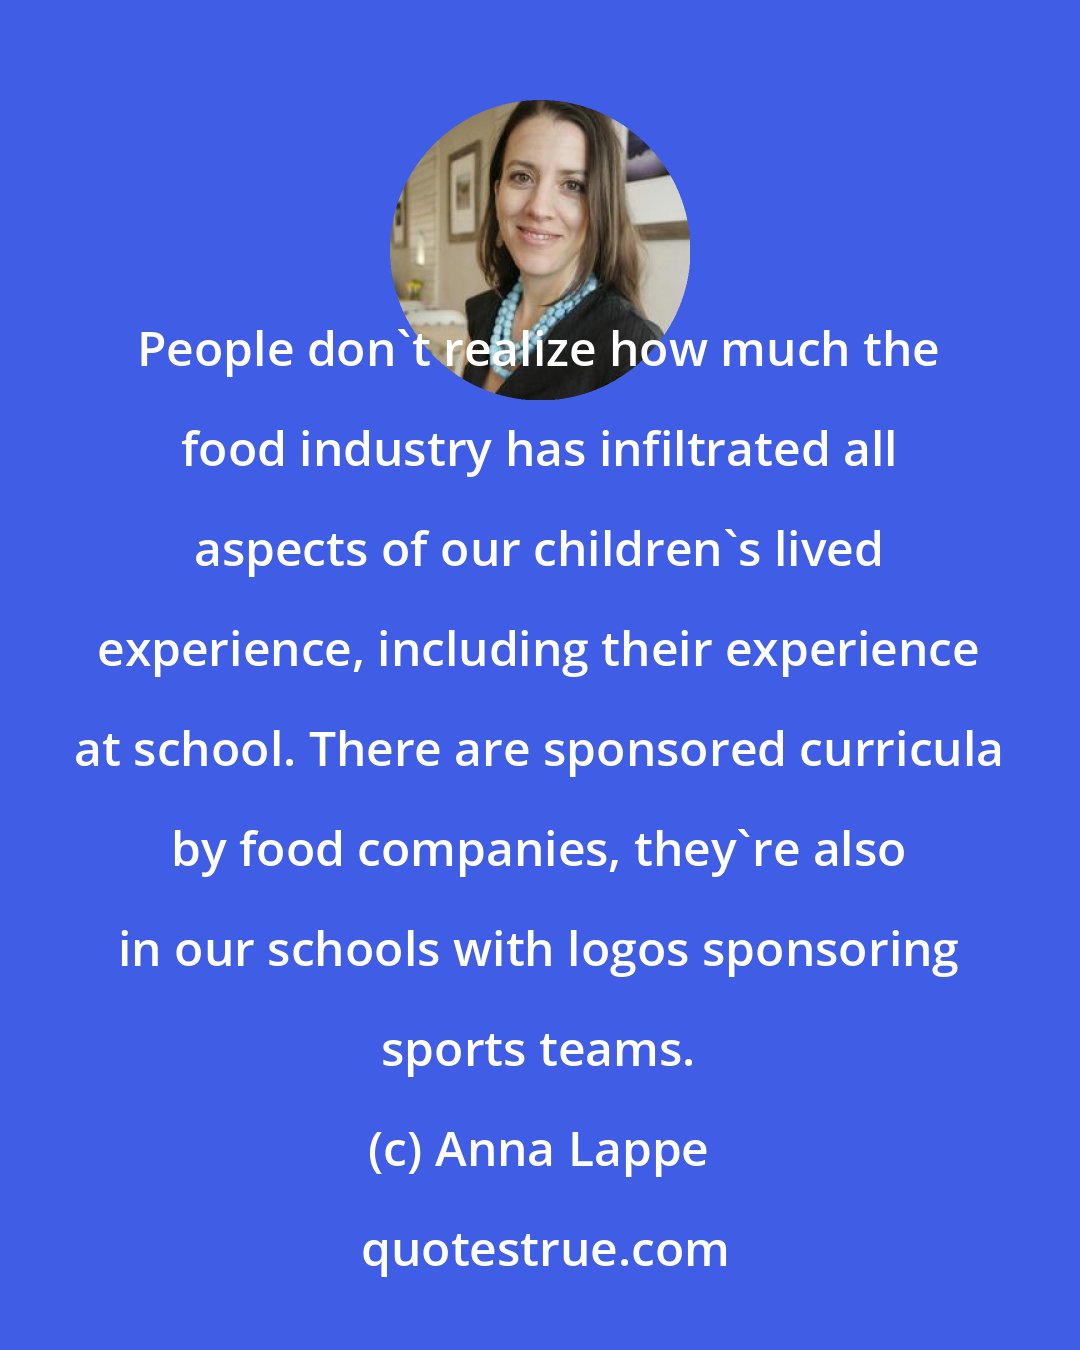 Anna Lappe: People don't realize how much the food industry has infiltrated all aspects of our children's lived experience, including their experience at school. There are sponsored curricula by food companies, they're also in our schools with logos sponsoring sports teams.